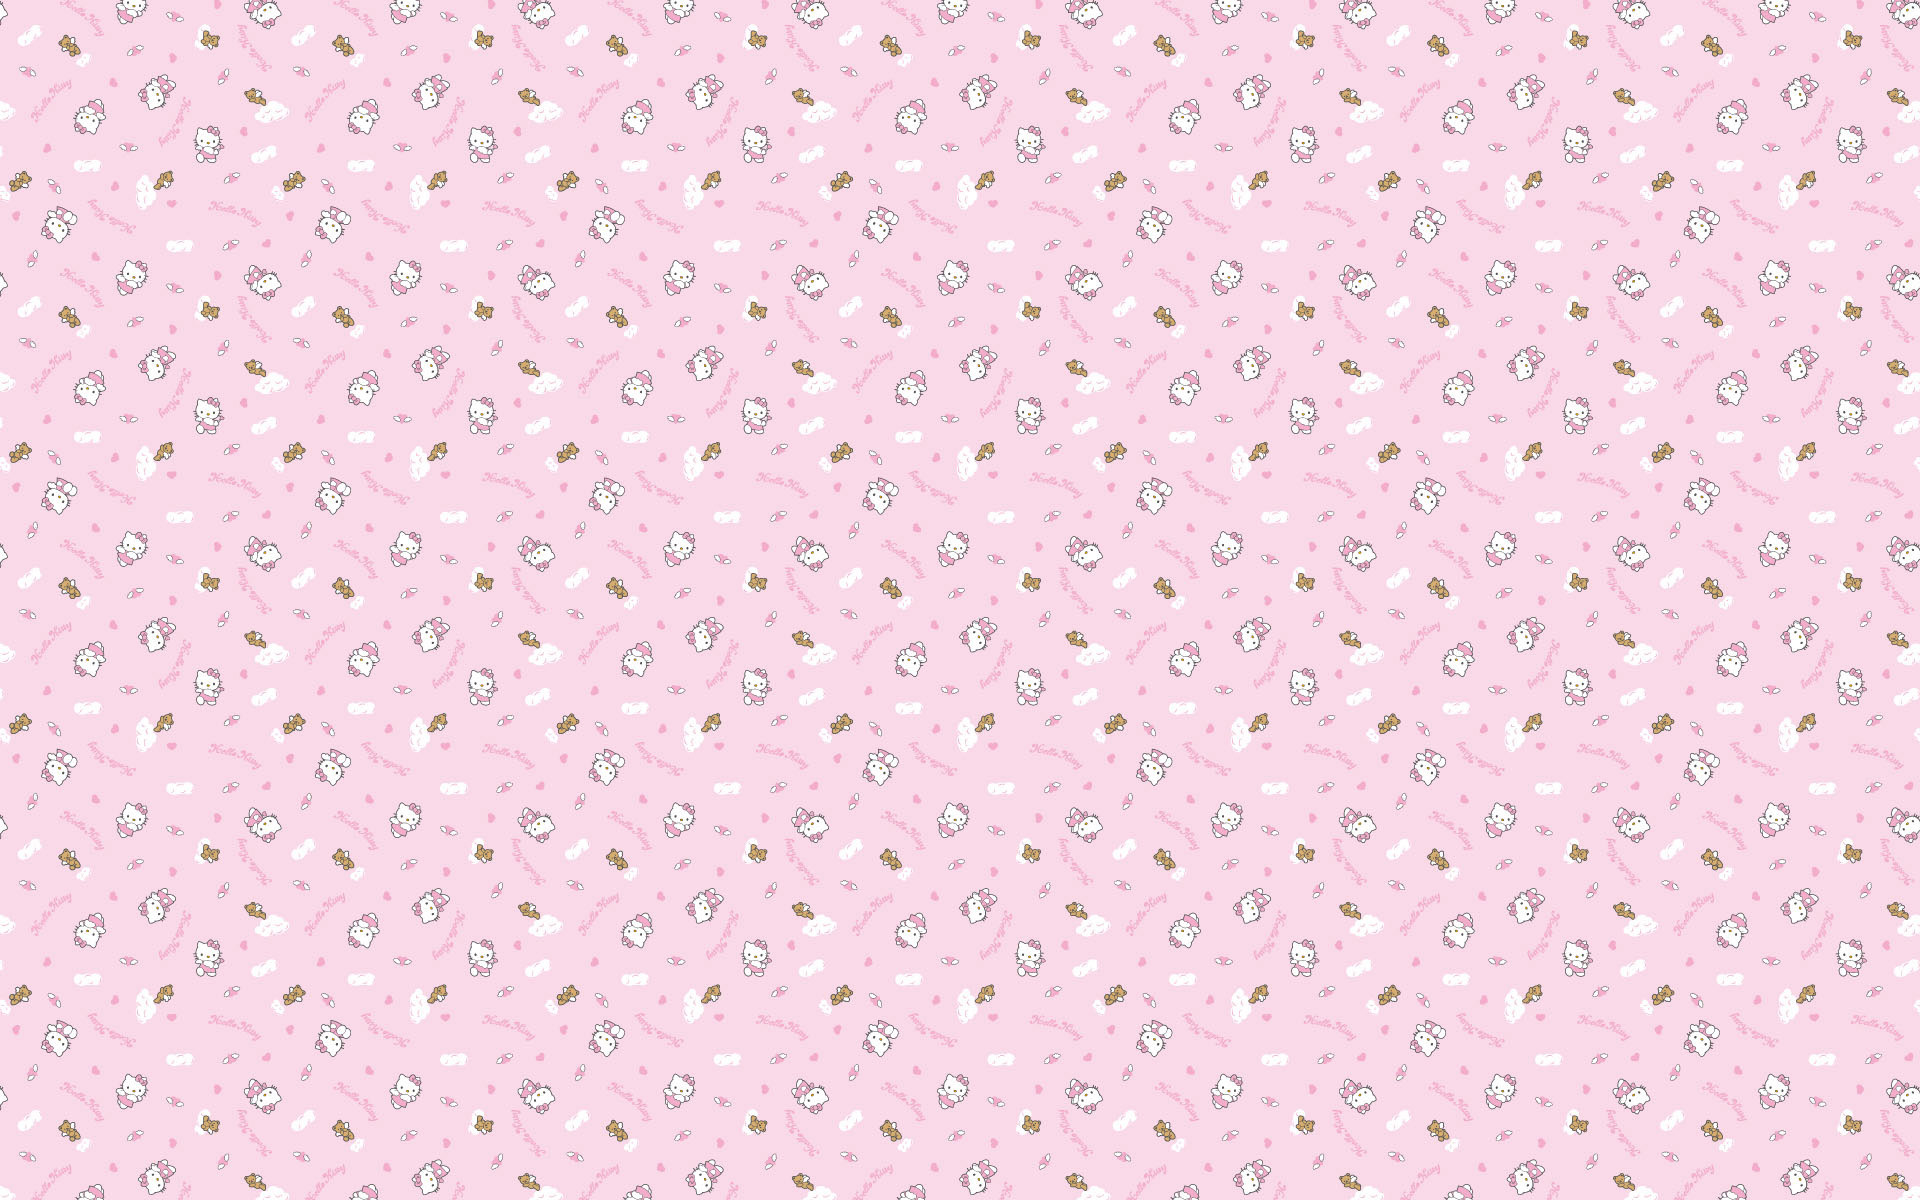 Free download tags pink background hello kitty wallpaper hello kitty pink wallpaper [1920x1200